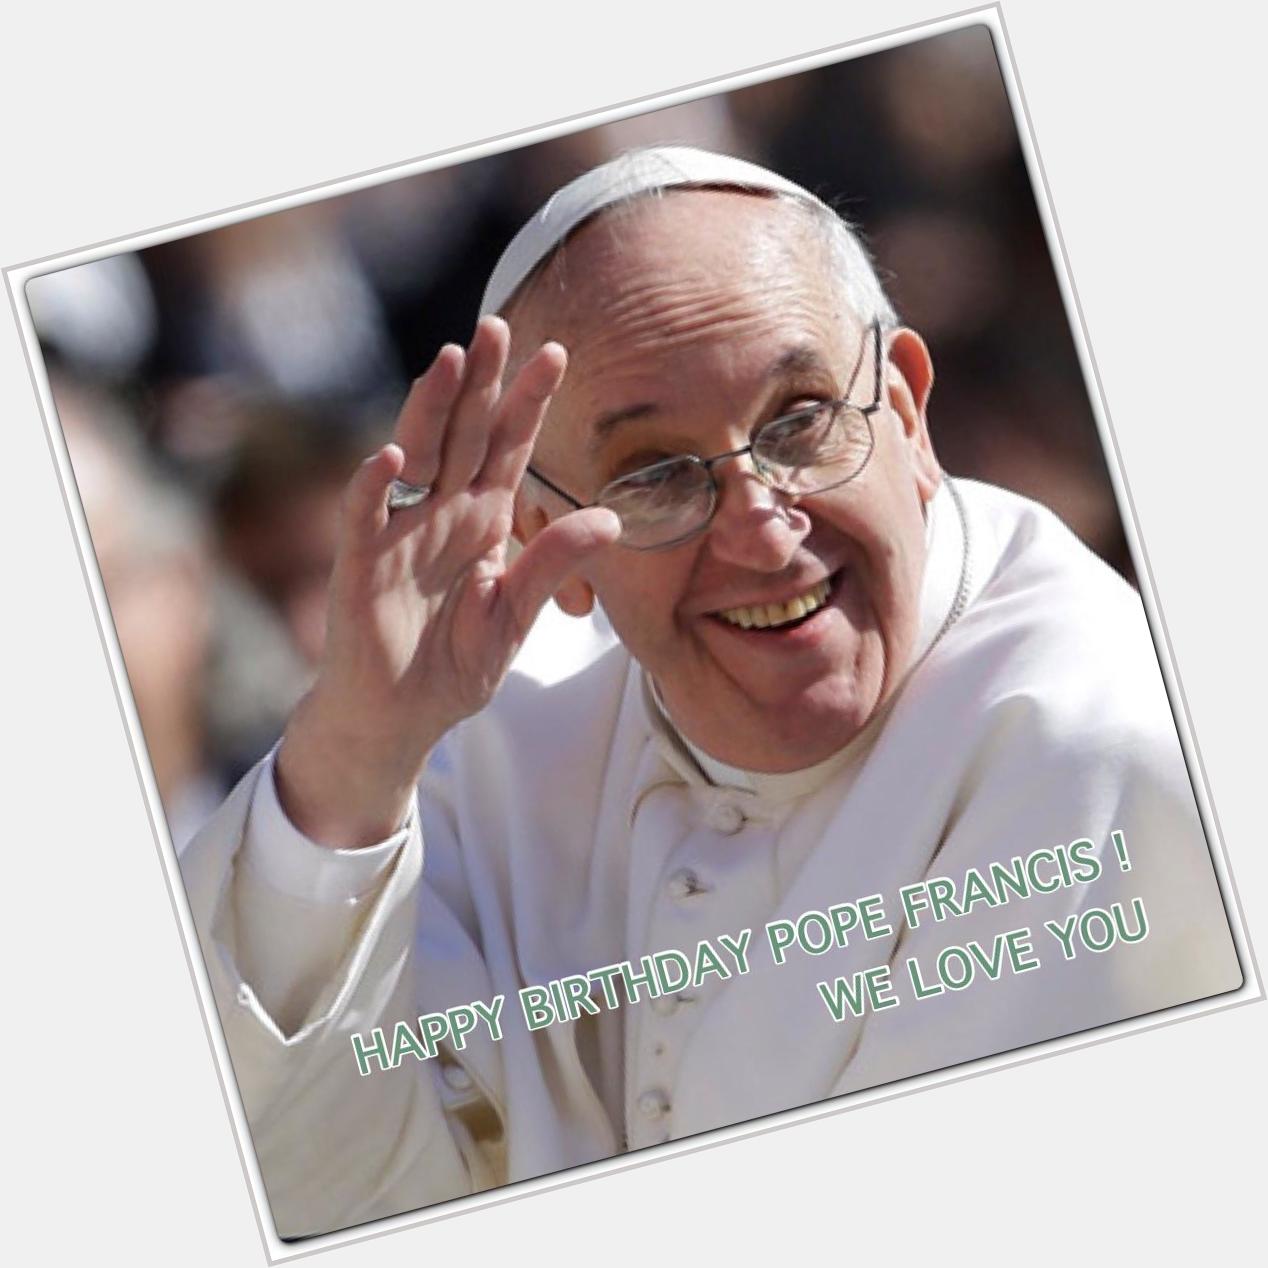 Happy birthday Pope Francis! The good people!s pope! We you! 